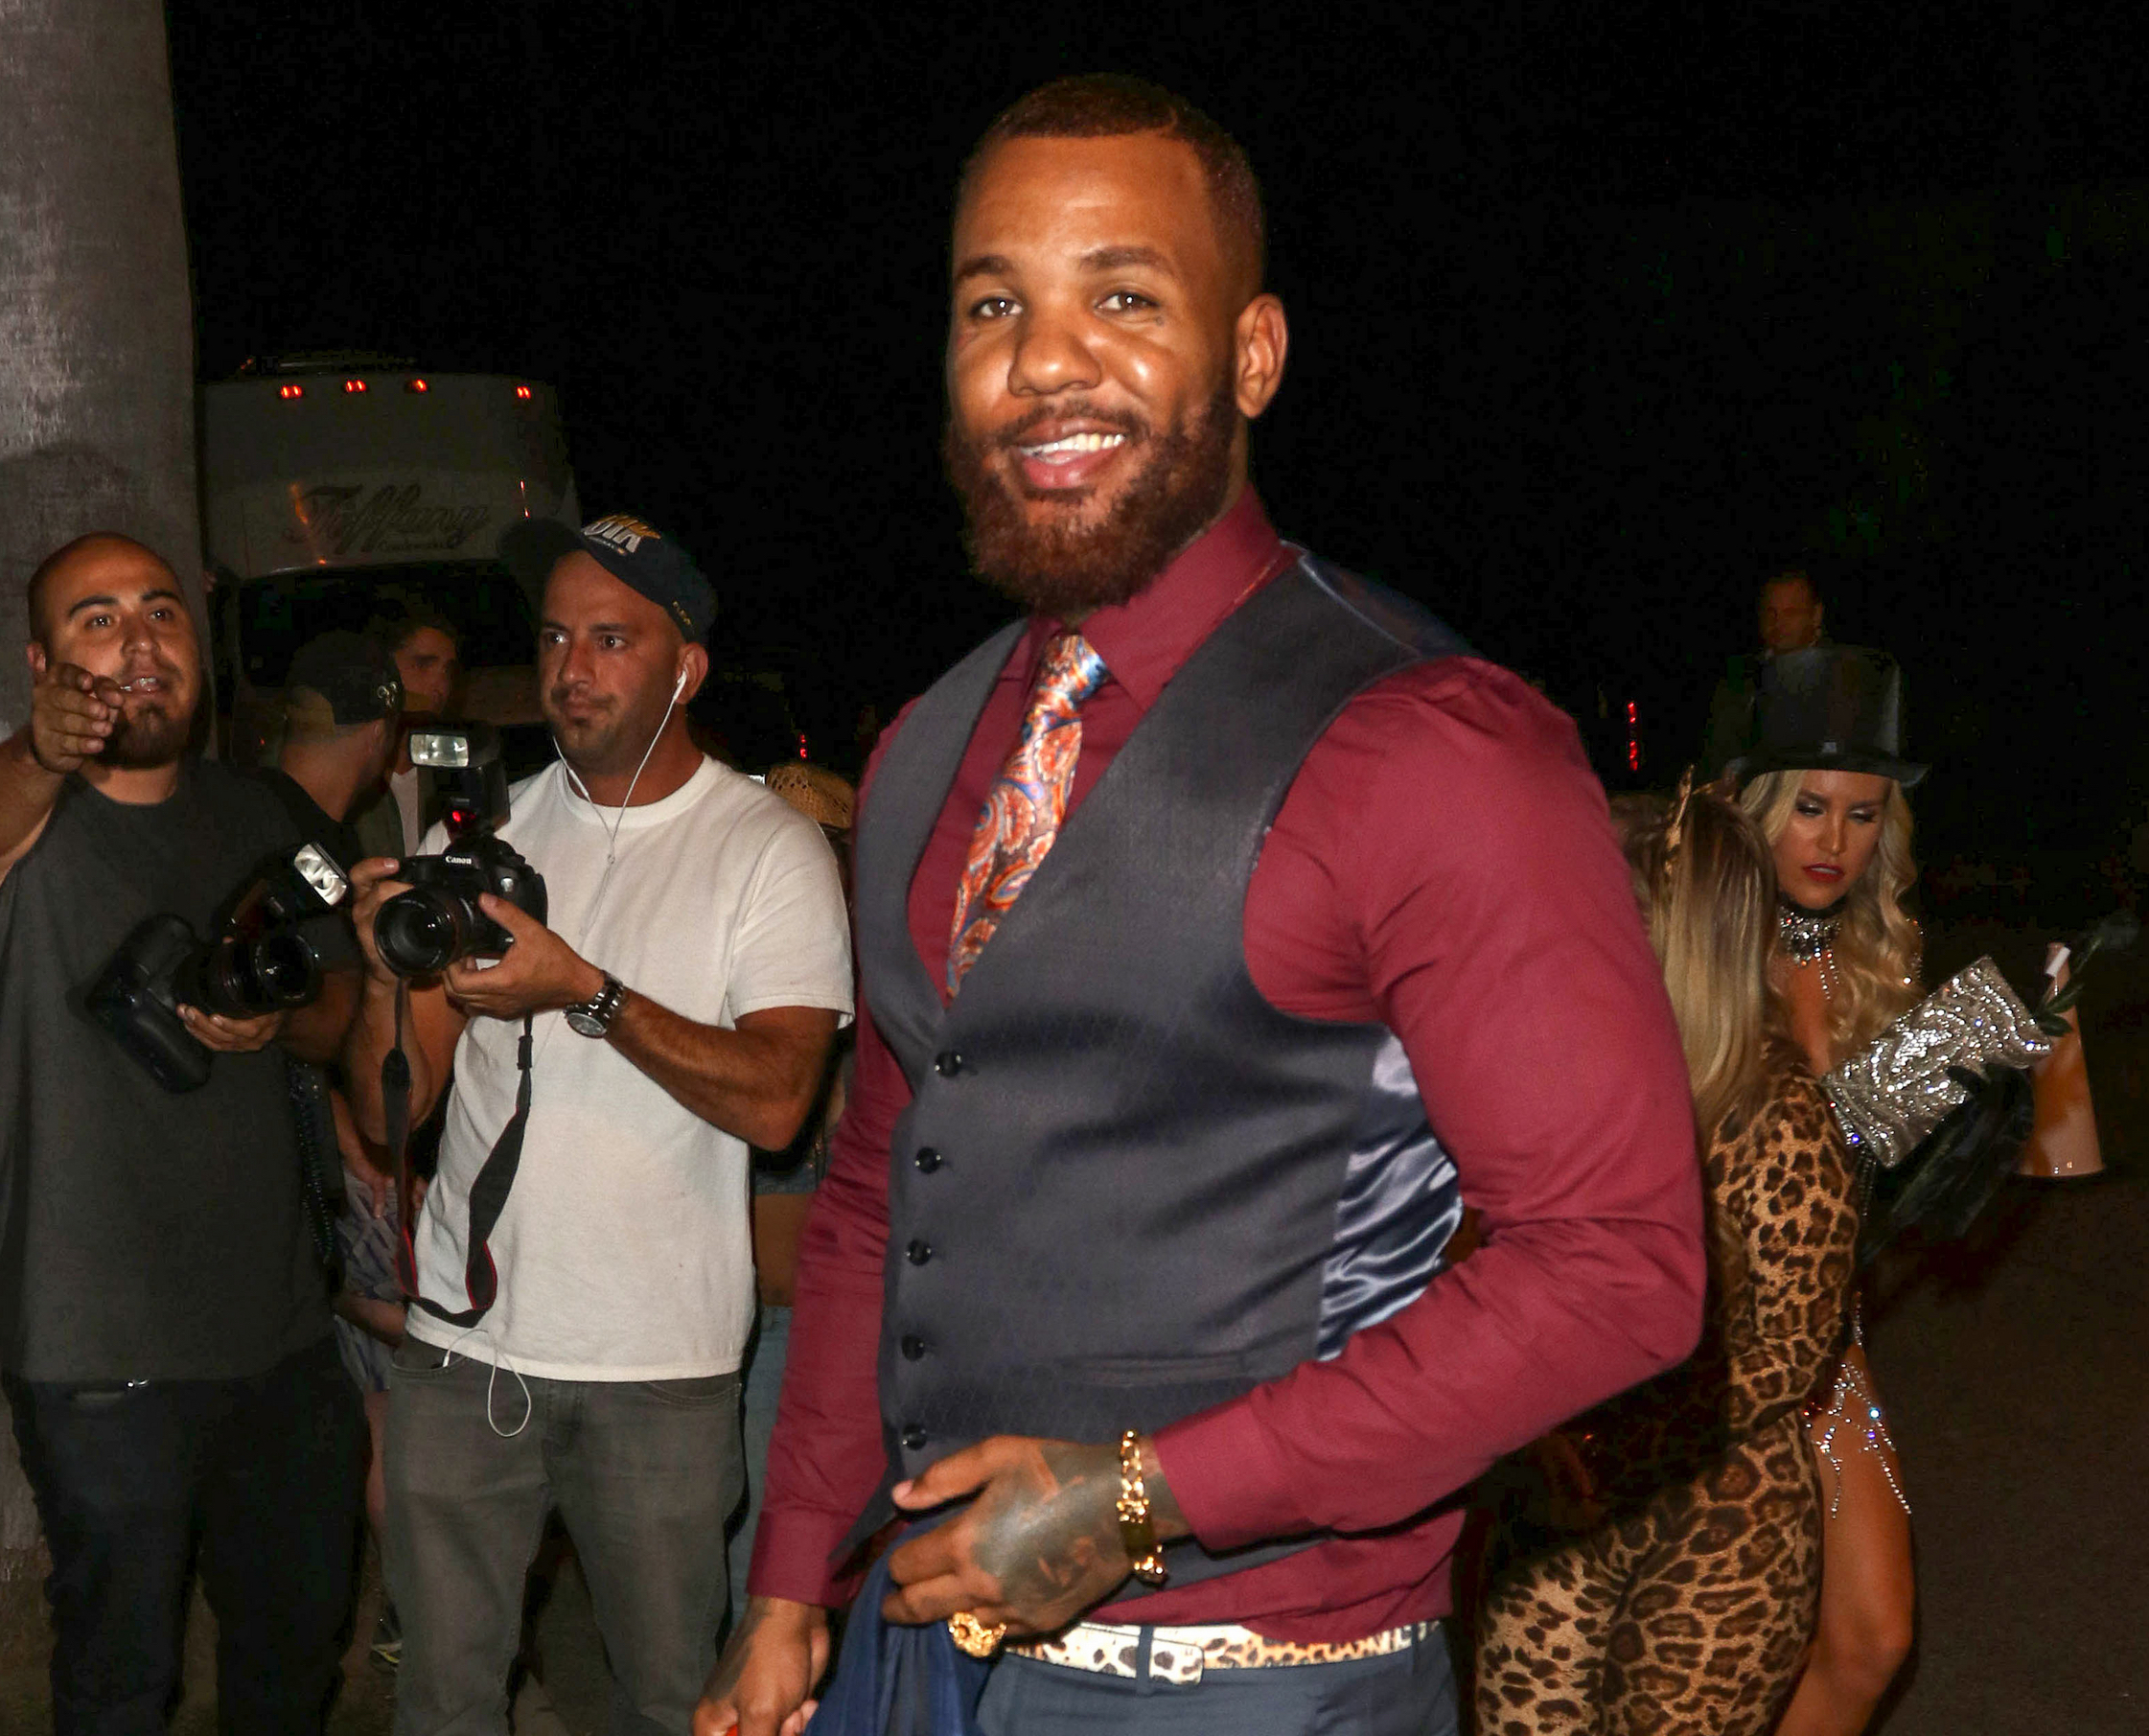 10/30/2015 - The Game - 2015 Casamigos Tequila Halloween Party - Arrivals - Private Residence - Beverly Hills, CA, USA - Keywords: Jayceon Taylor, Jayceon Terrell Taylor, Game, American rapper, actor, man, Full Length Shot, Vertical, City Of Los Angeles, California, Portrait, Photography, Residential Building, Film Industry, Arts Culture and Entertainment, Attending, Celebrity, Celebrities, Person, People, Candid on the street, Costume Party, Social Event, Celebration, Holiday Orientation: Portrait Face Count: 1 - False - Photo Credit: jmx / PRPhotos.com - Contact (1-866-551-7827) - Portrait Face Count: 1